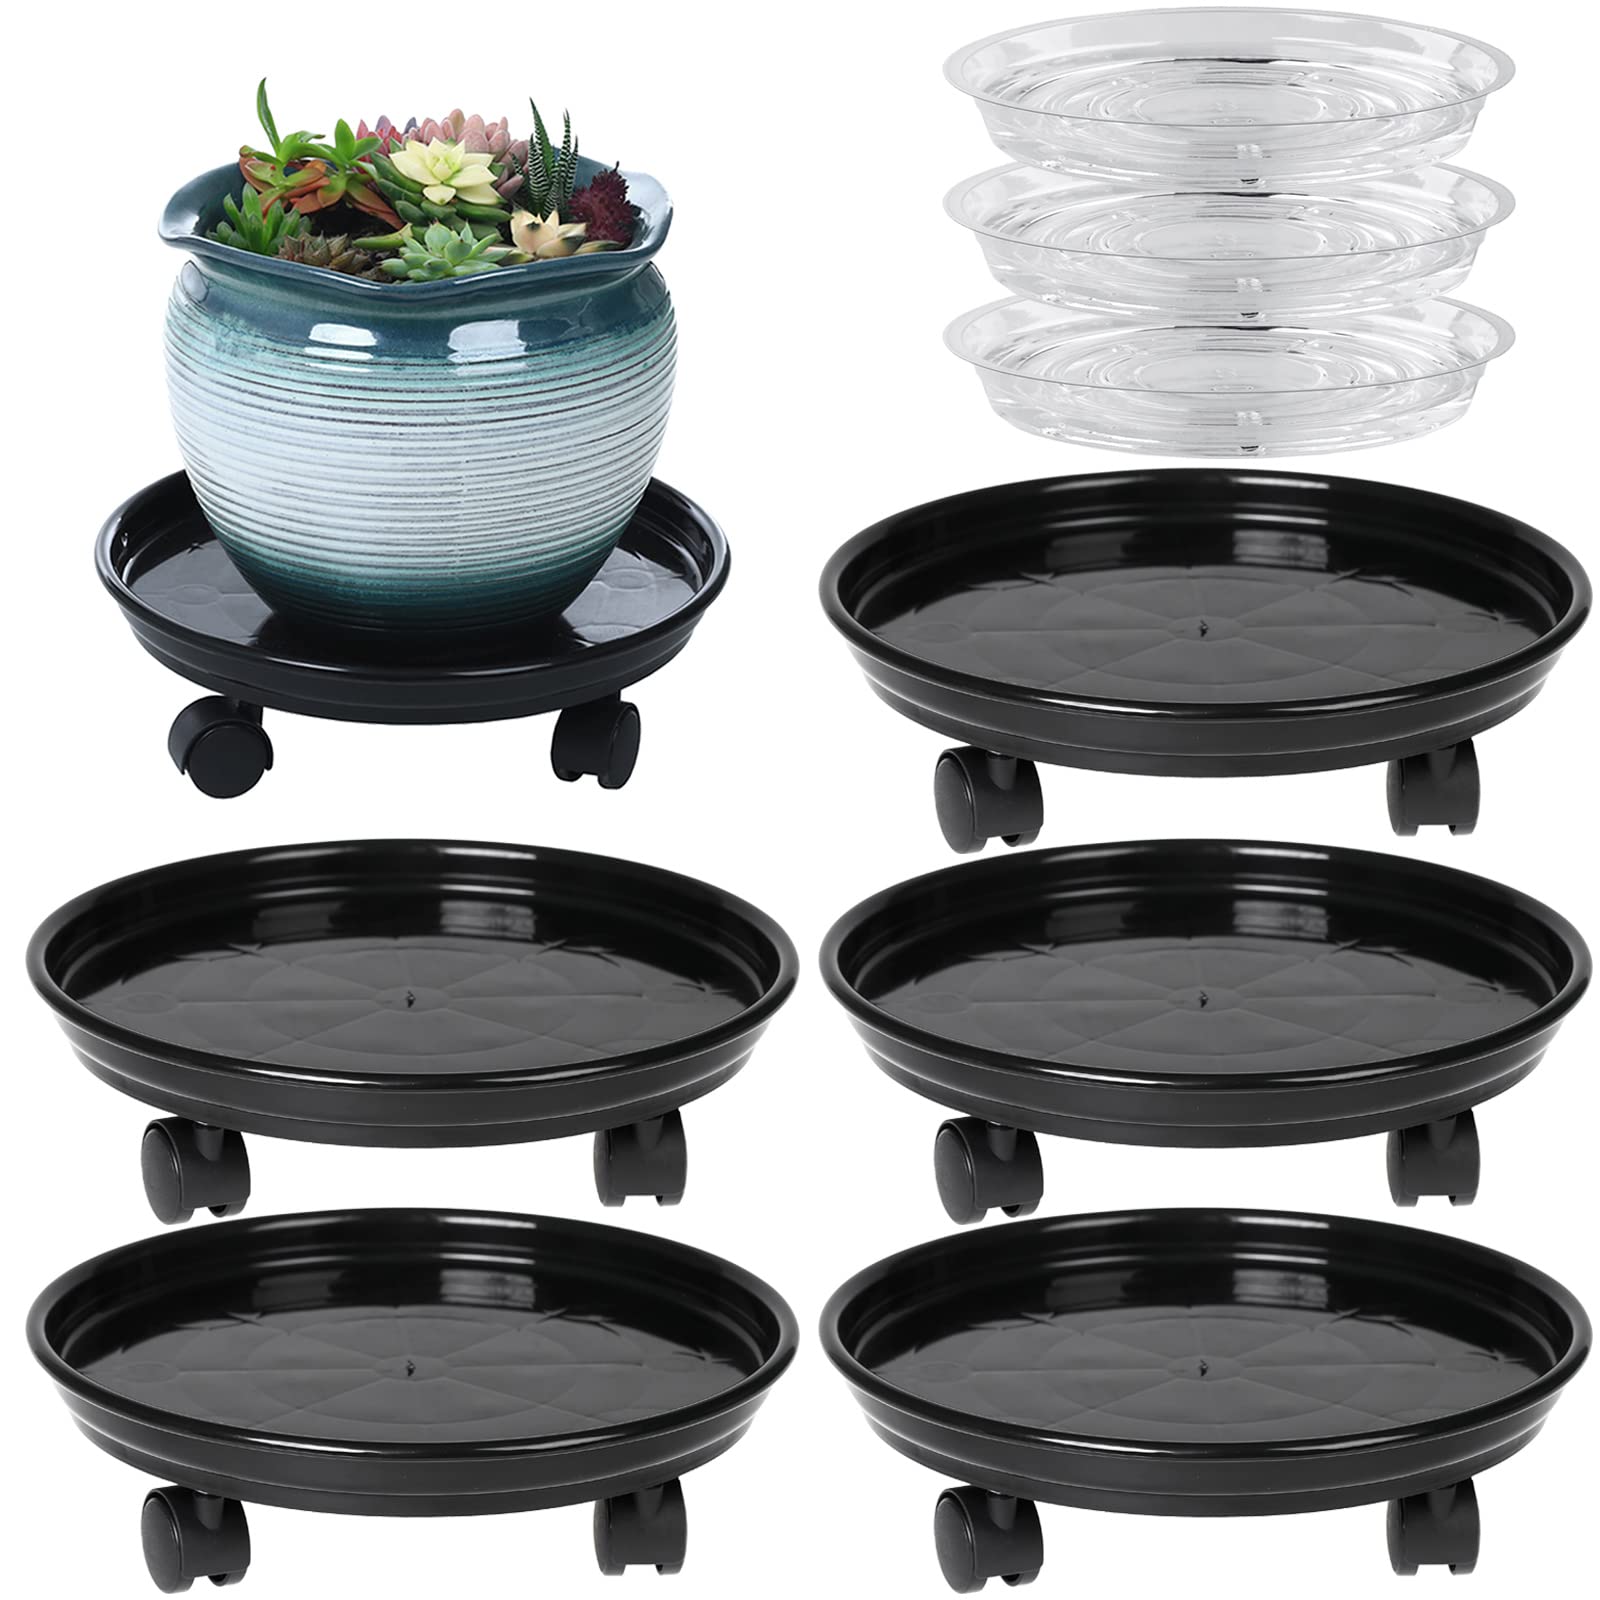 Circloophs 5 Packs Plastic Plant Caddy with Casters 12" Heavy-Duty Plant Dolly Rolling Plant Stand with Wheels for Moving Heavy and Large Plant Pot Saucers Plant Rollers Indoor and Outdoor, Black 5 Black